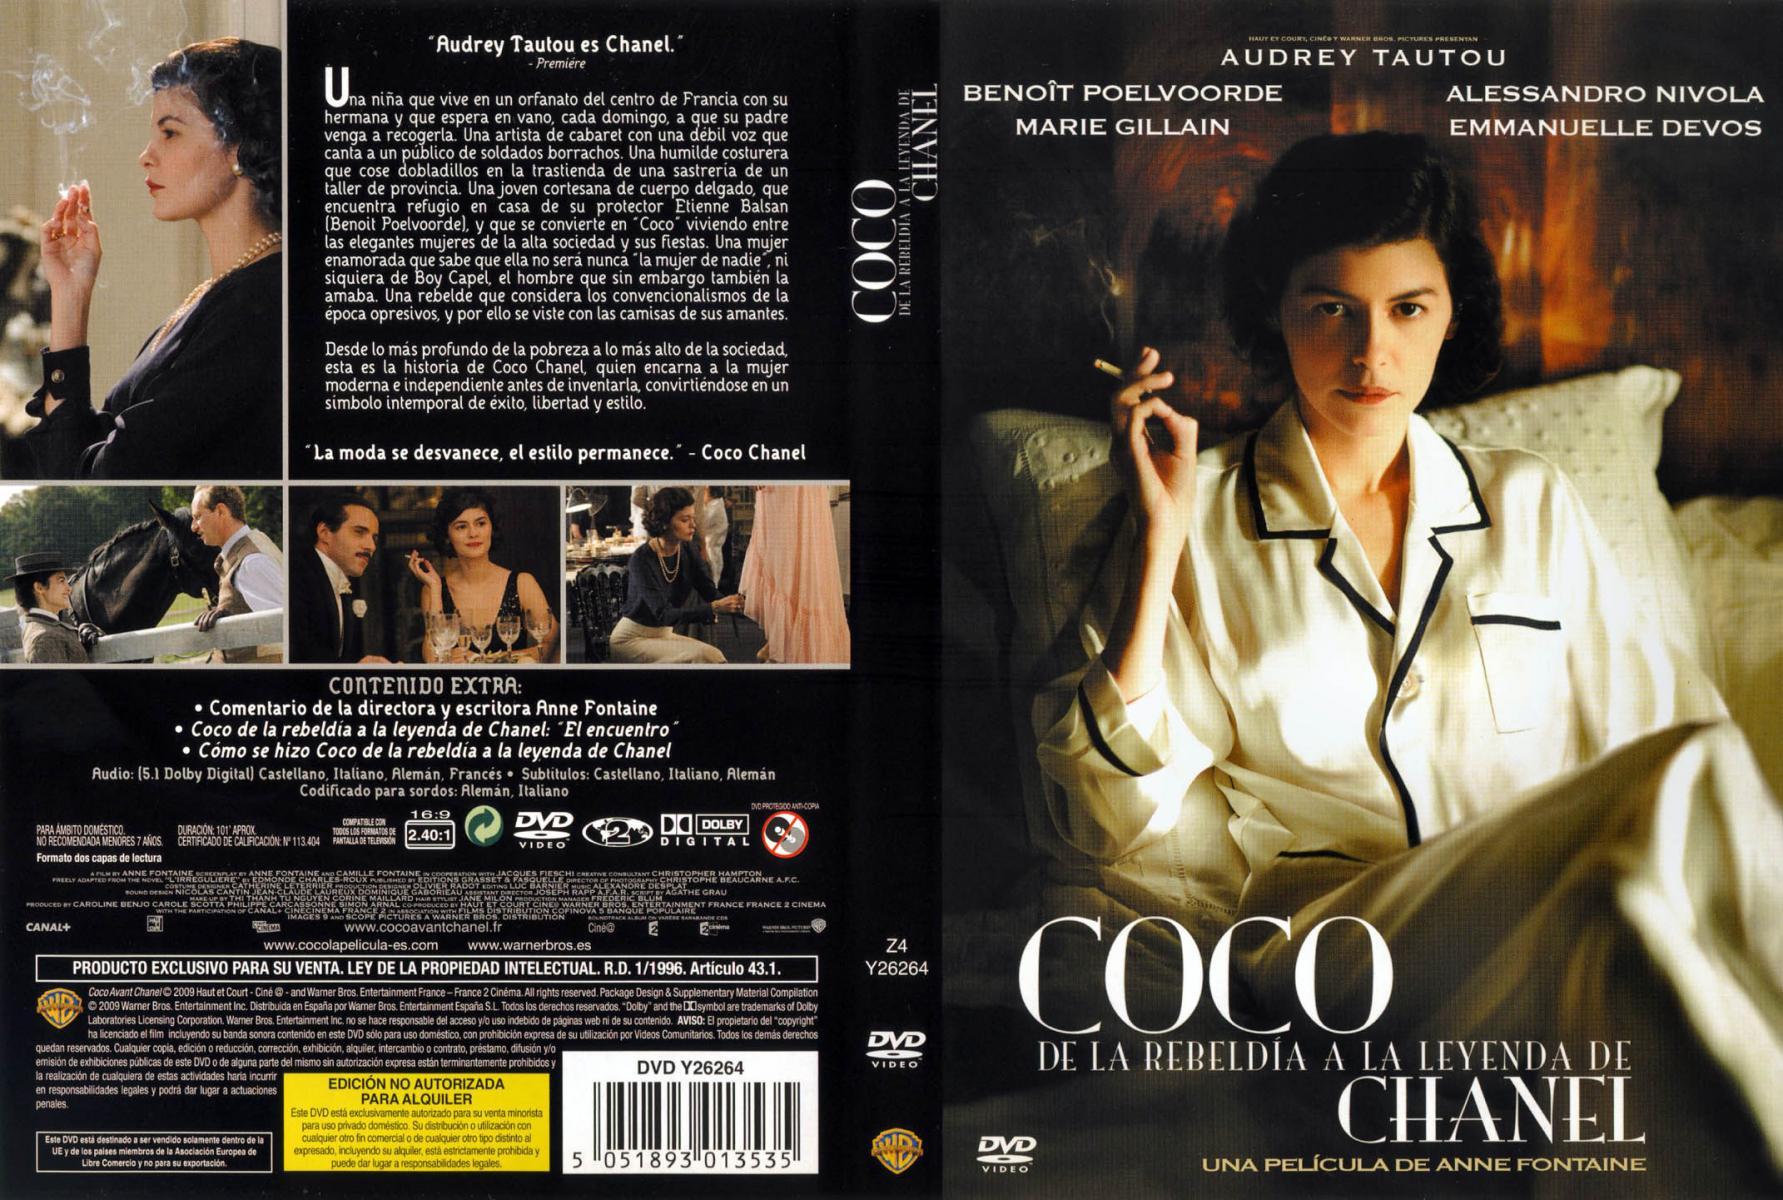 Image gallery for Coco avant Chanel (2009) - Filmaffinity